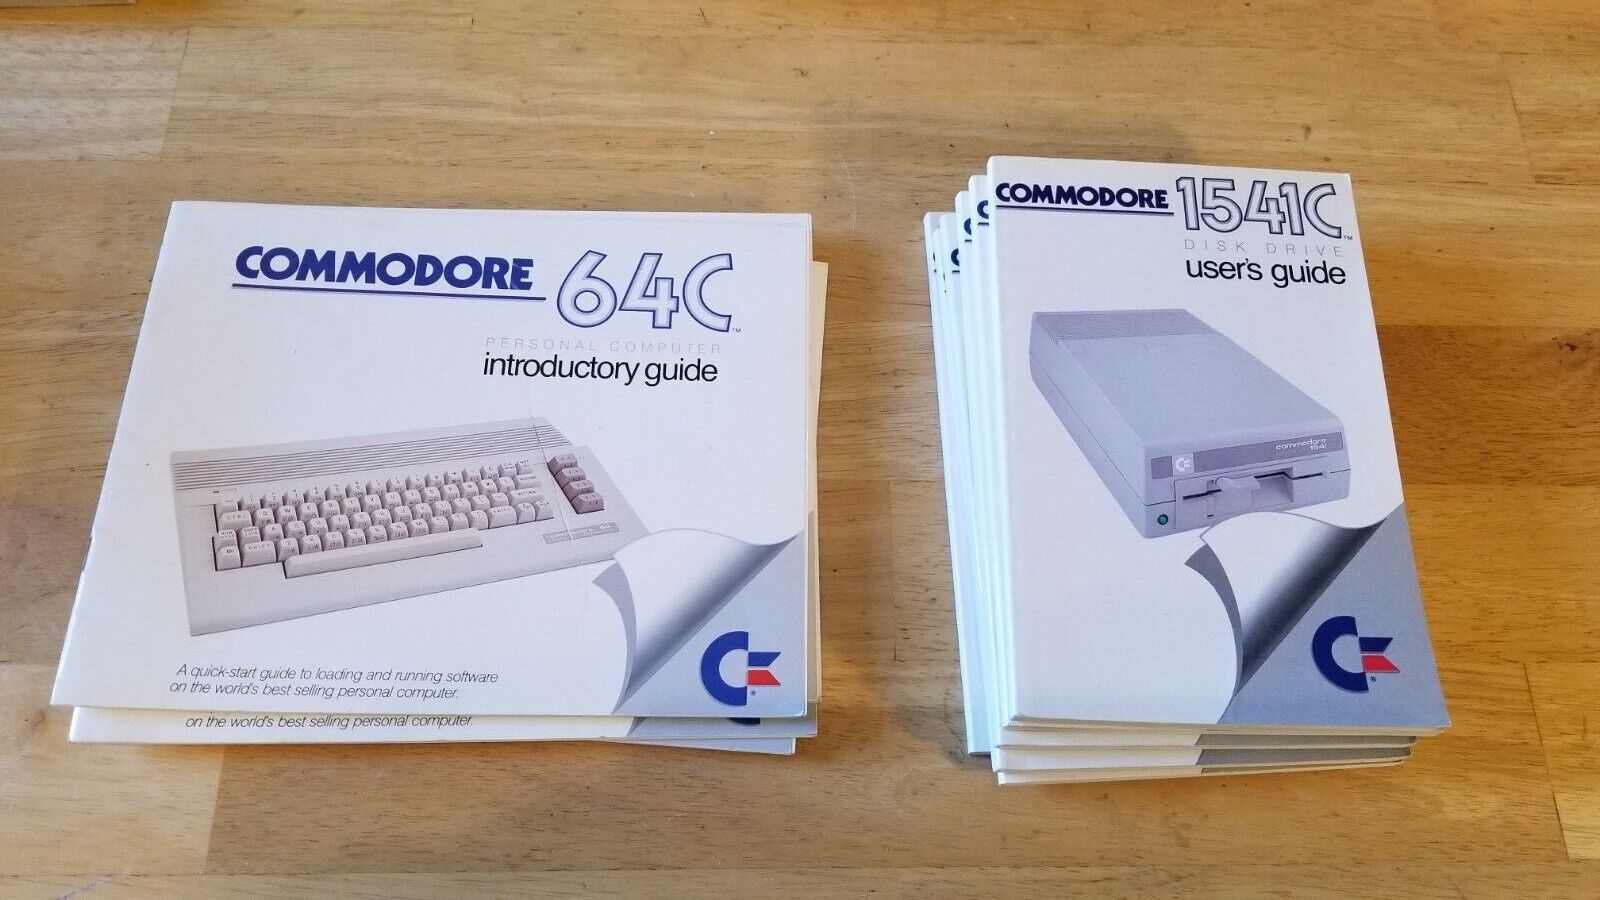 COMMODORE 64C personal computer introductory guide + 1541C Users Guide 